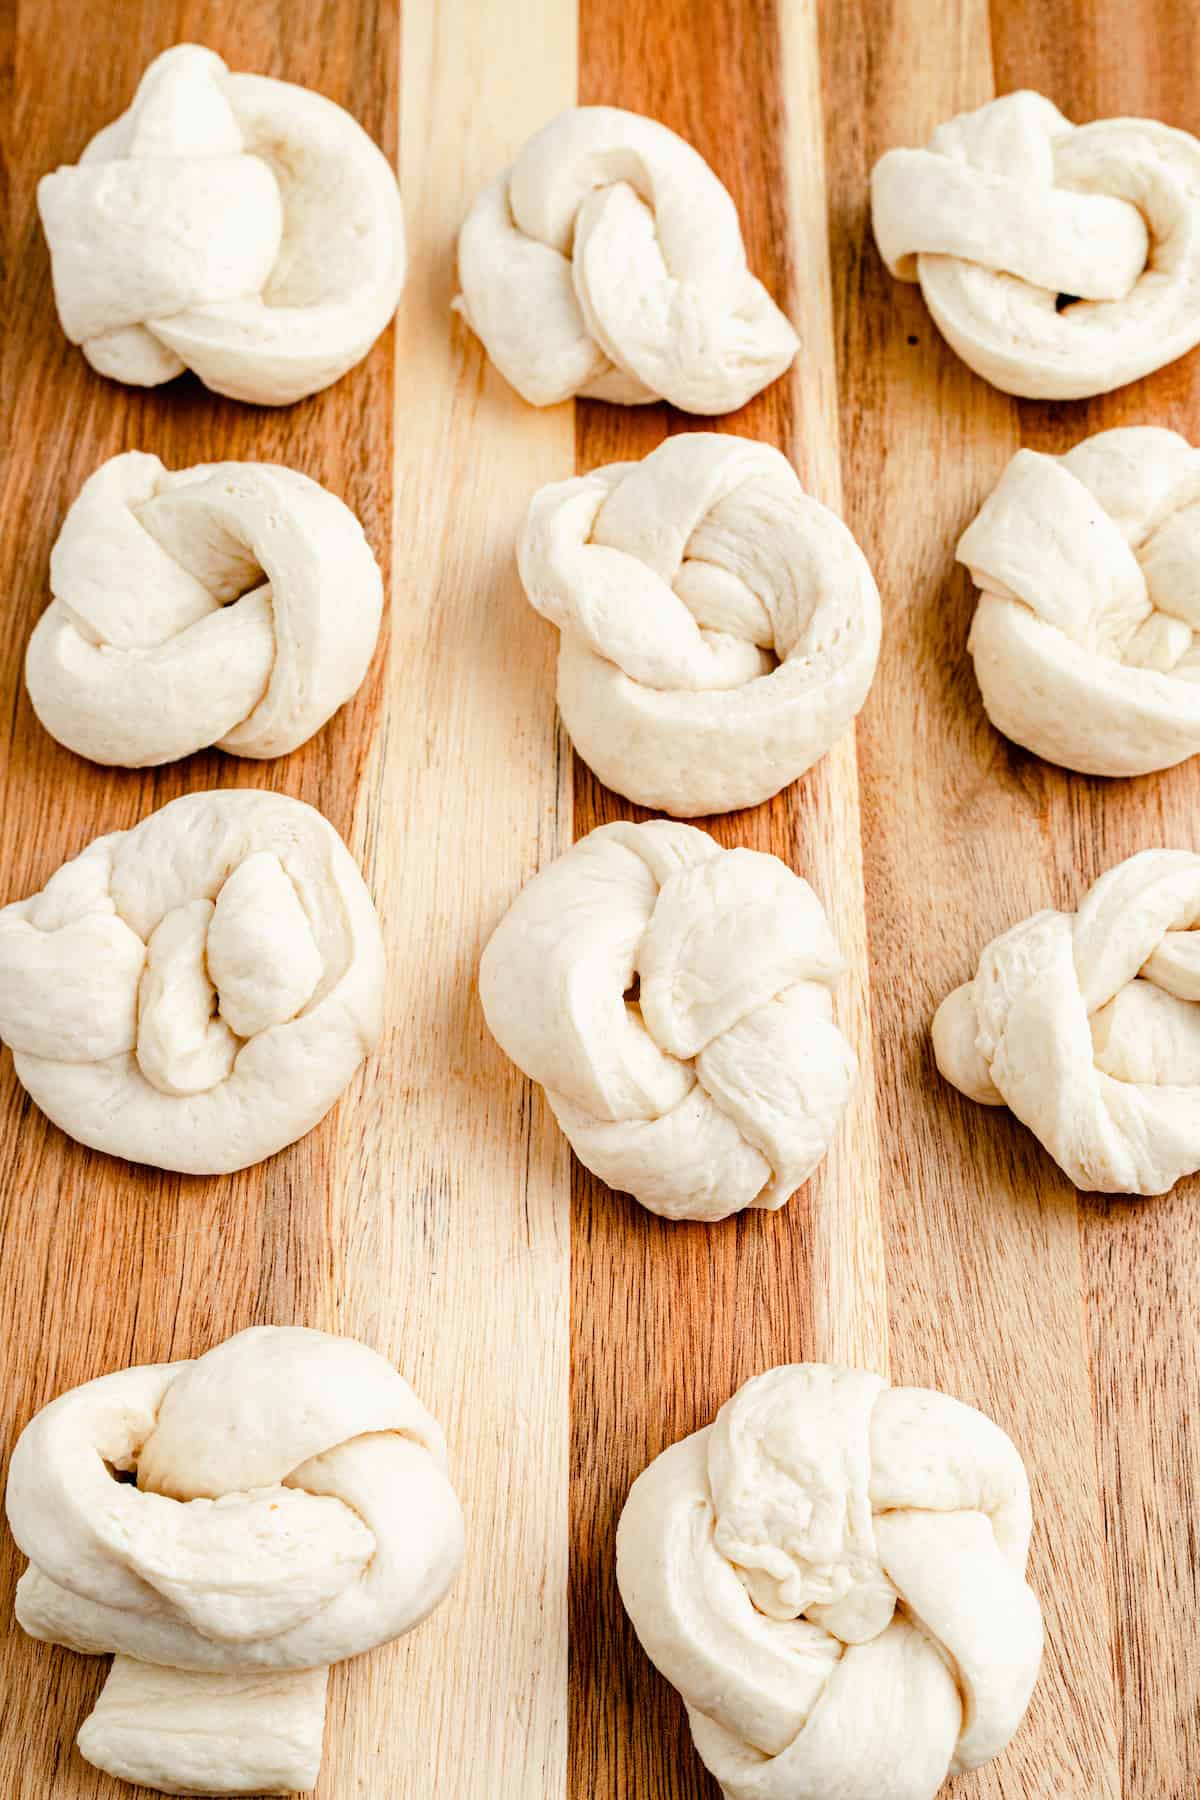 Unbaked and unseasoned strips of pizza dough, shaped into knots on a work surface.